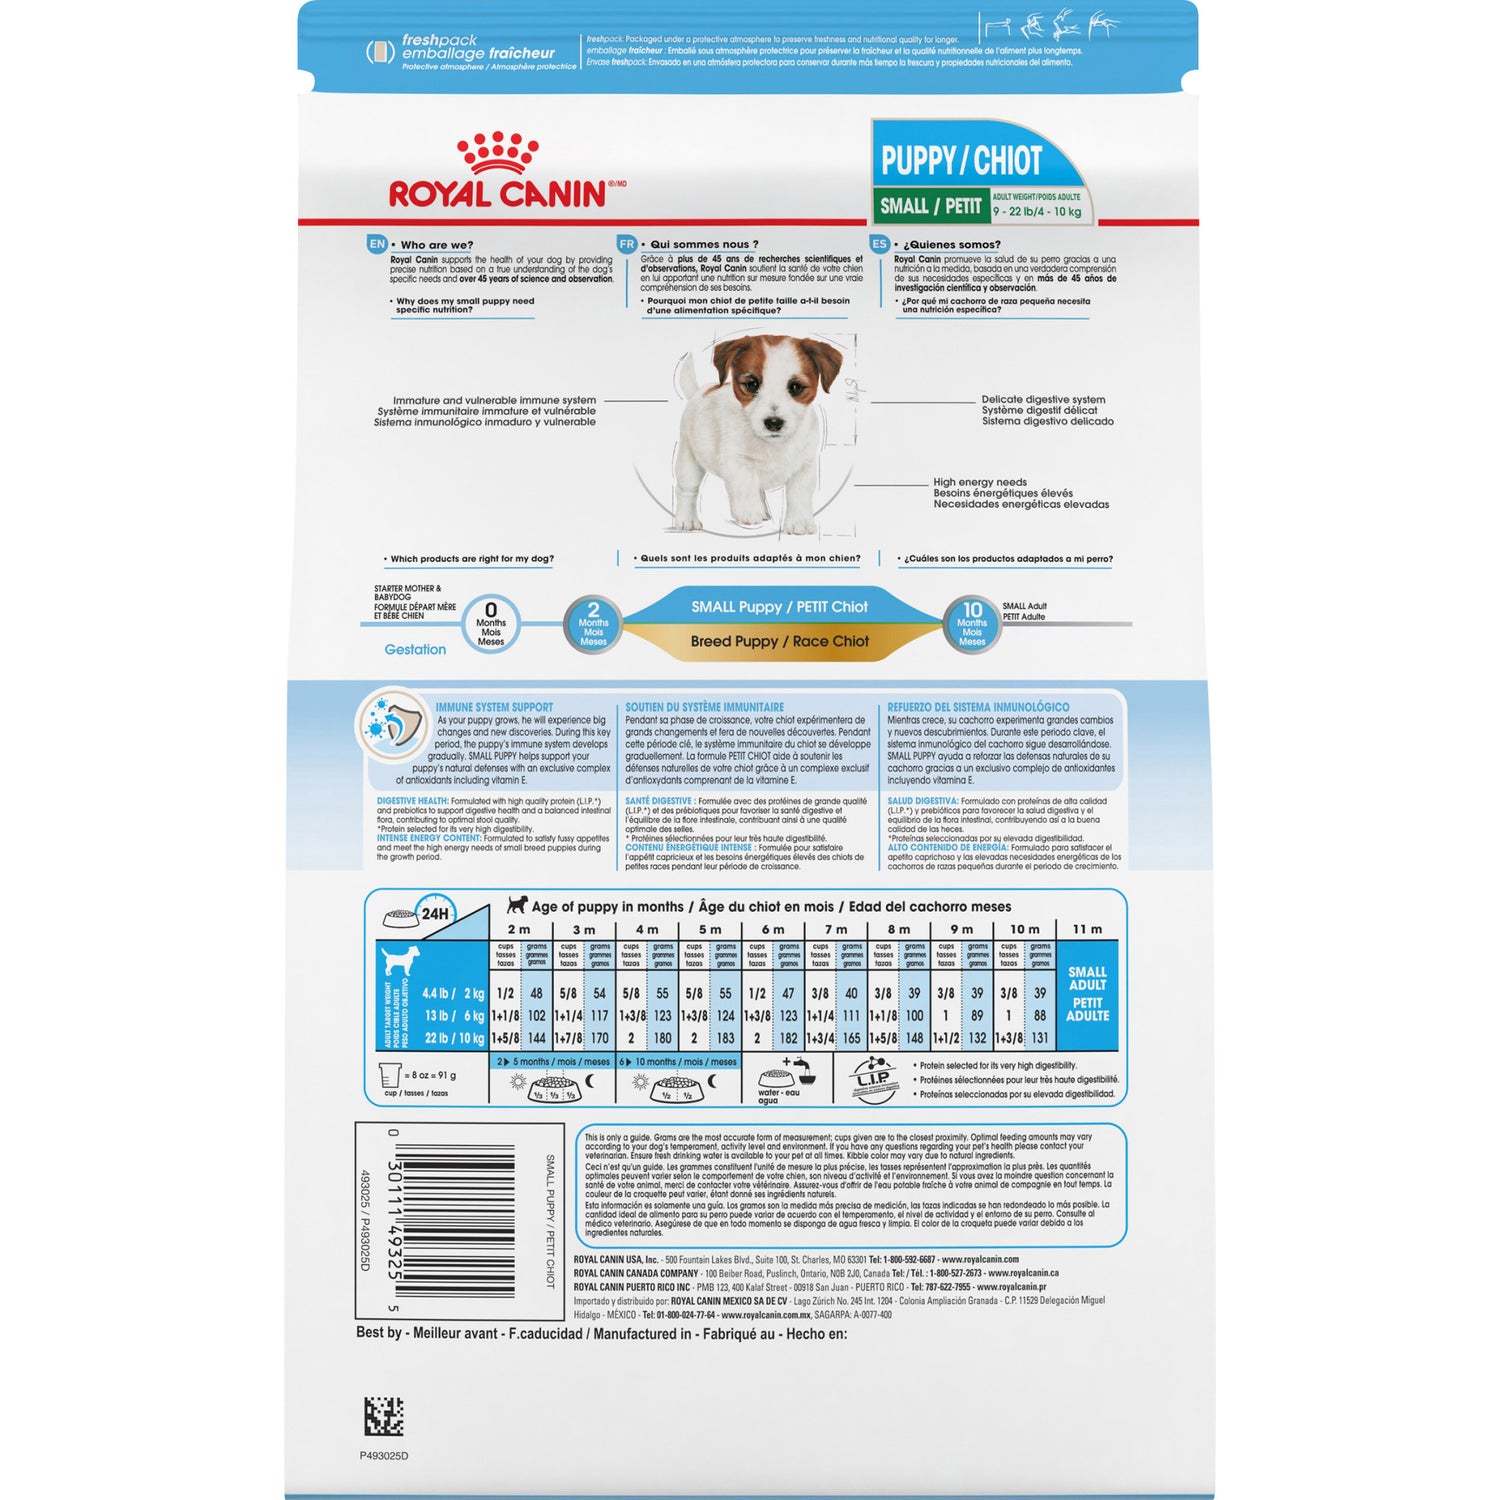 Royal Canin® Size Health Nutrition™ Small Puppy Dry Puppy Food